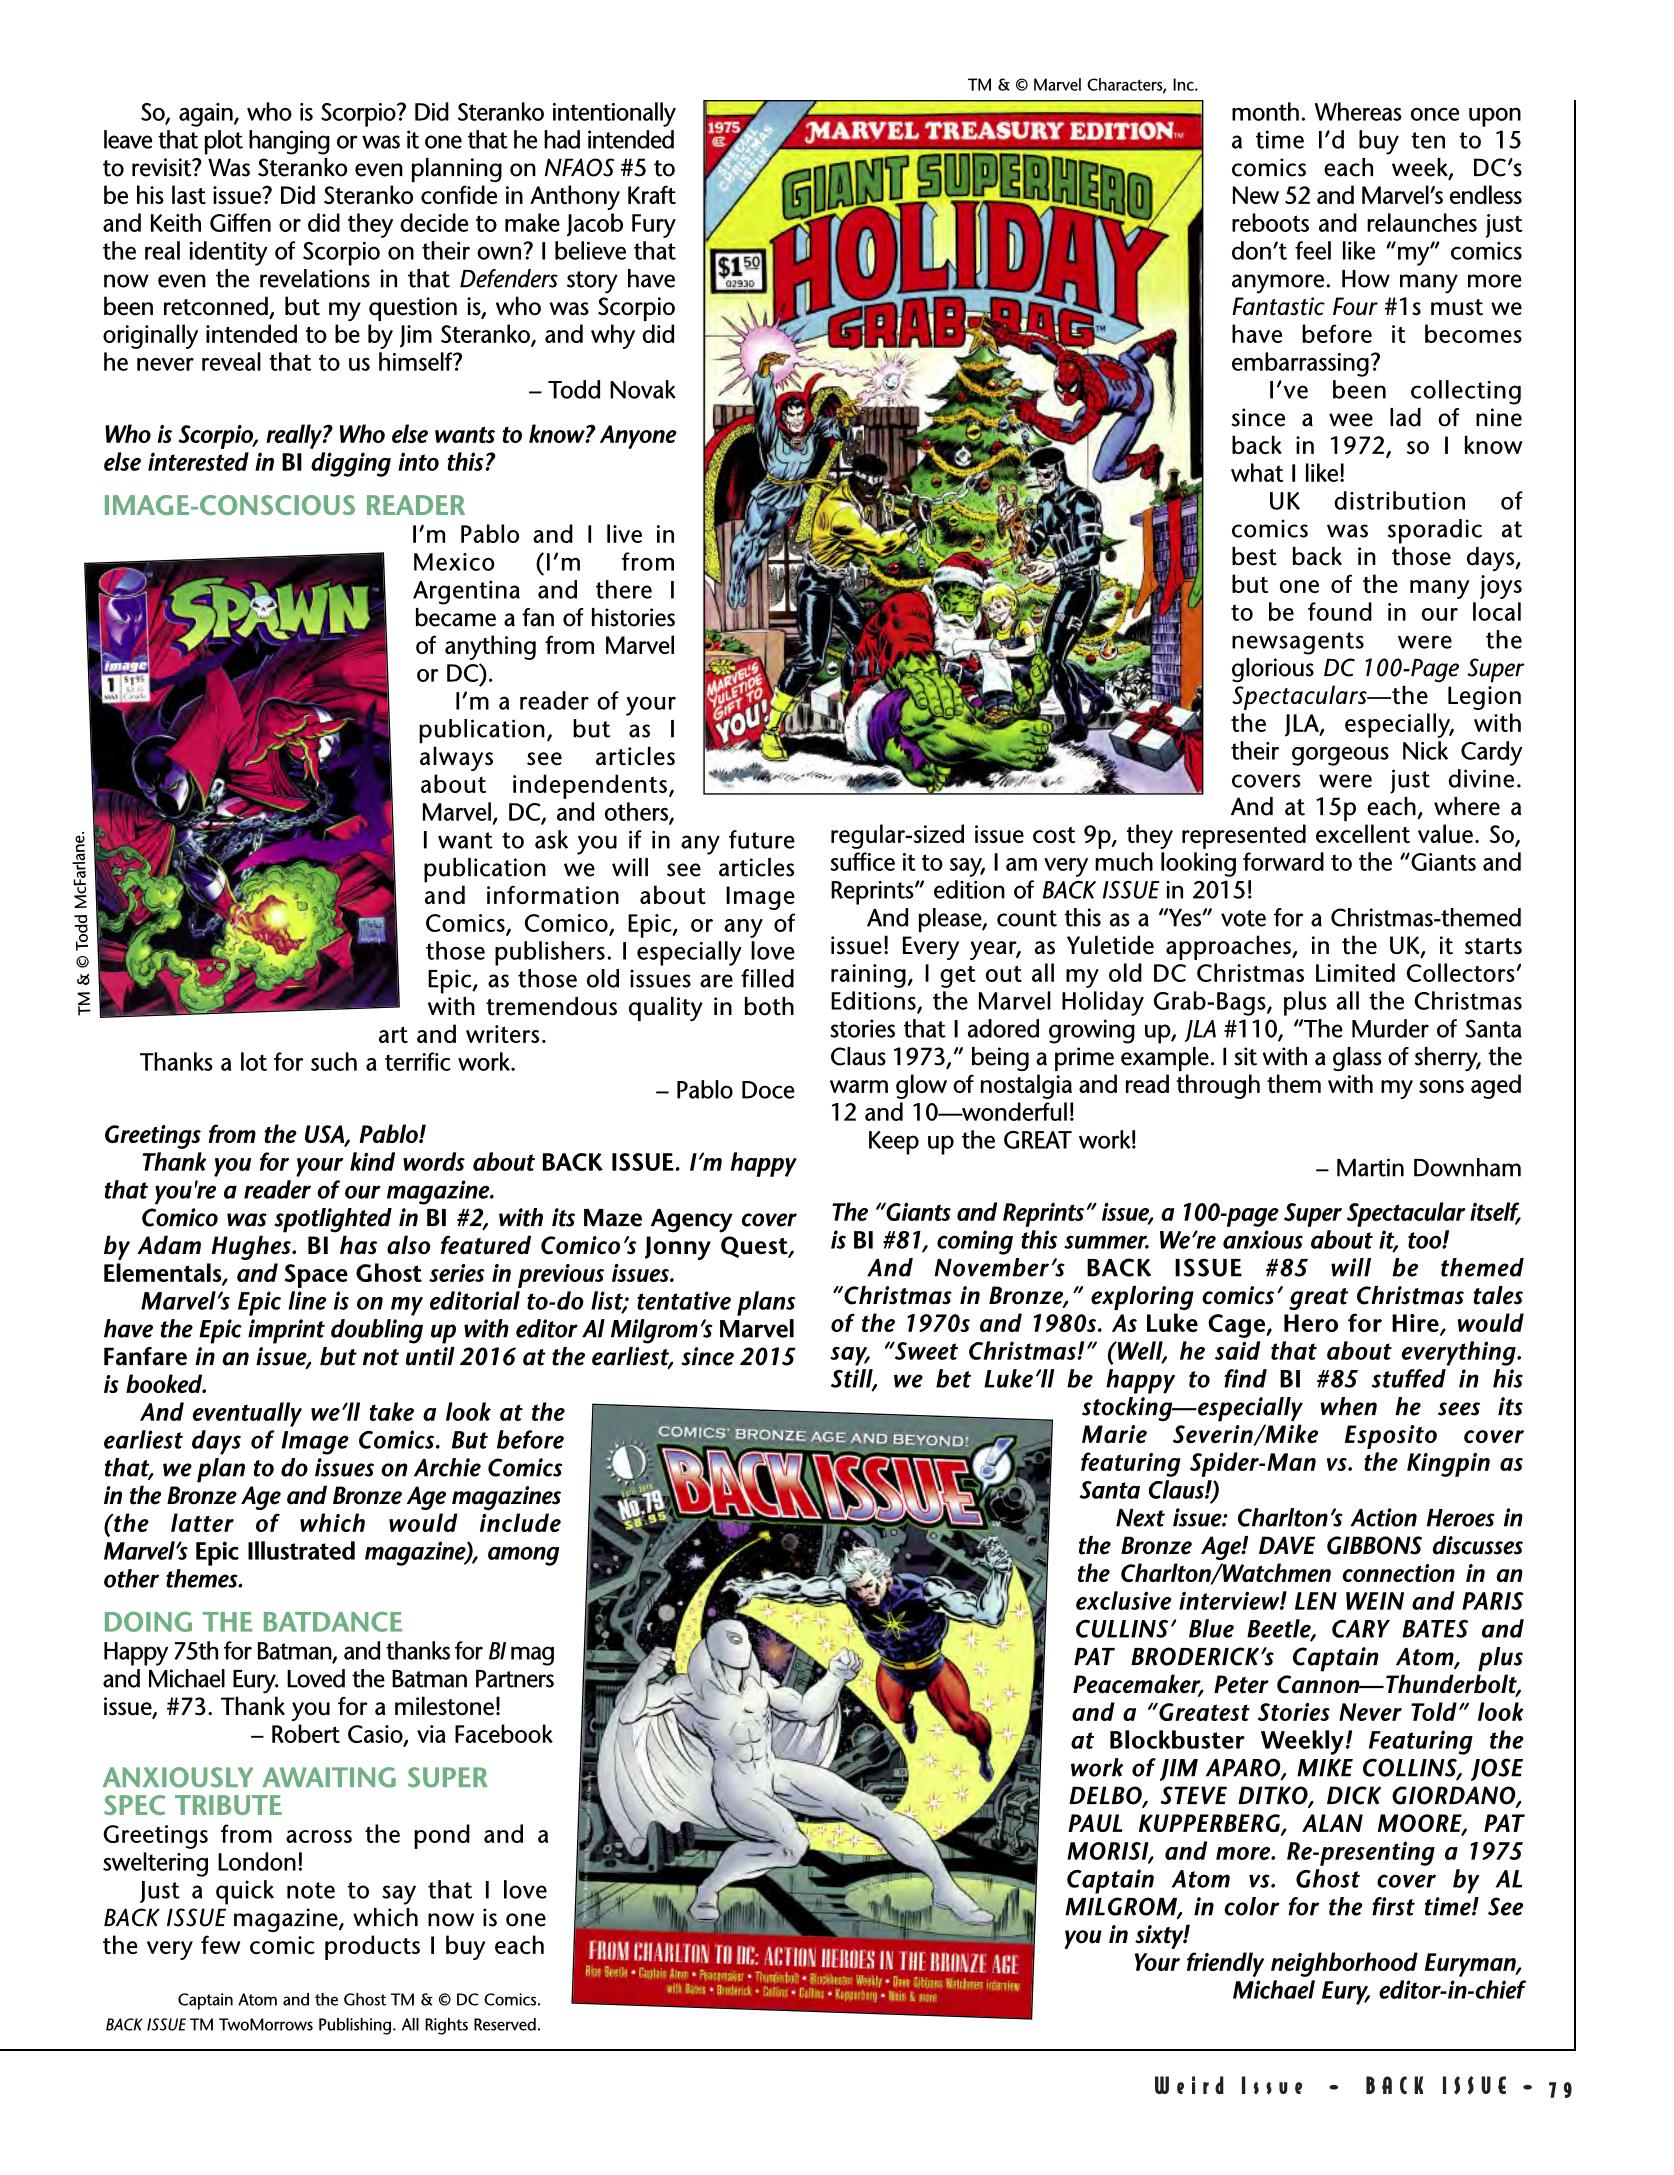 Read online Back Issue comic -  Issue #78 - 80